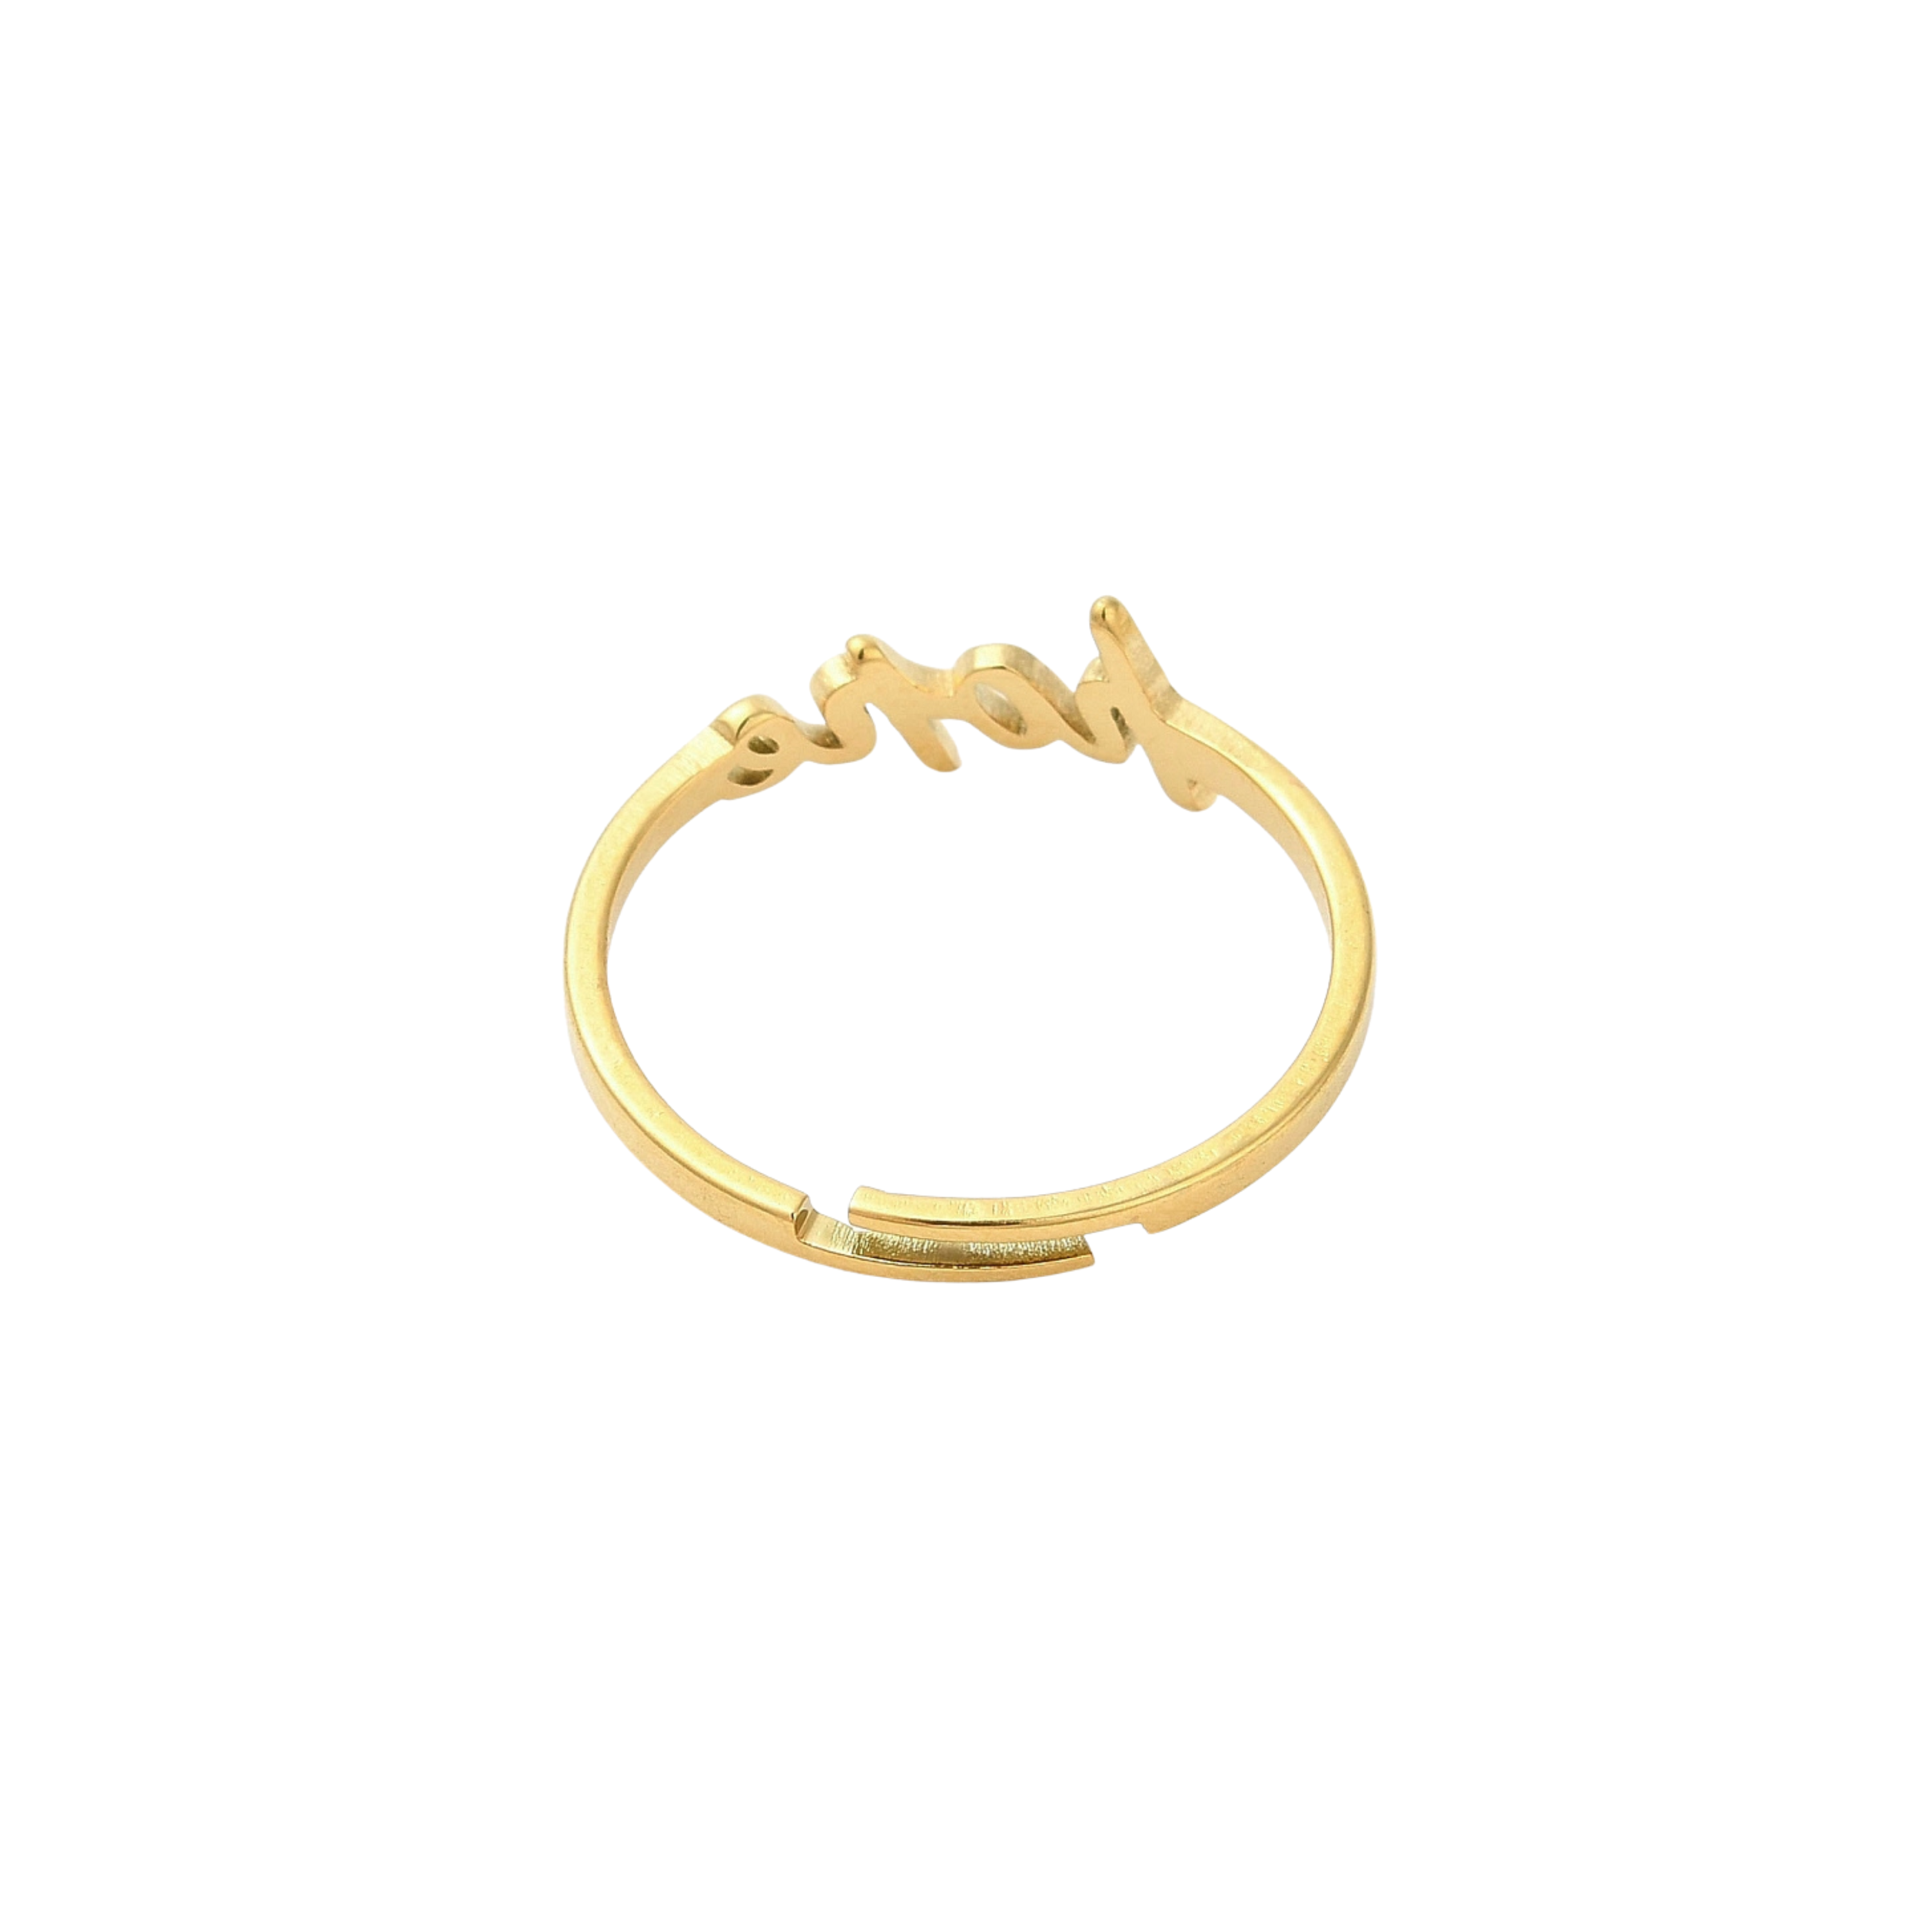 180 + Gold Ring Designs Online in India